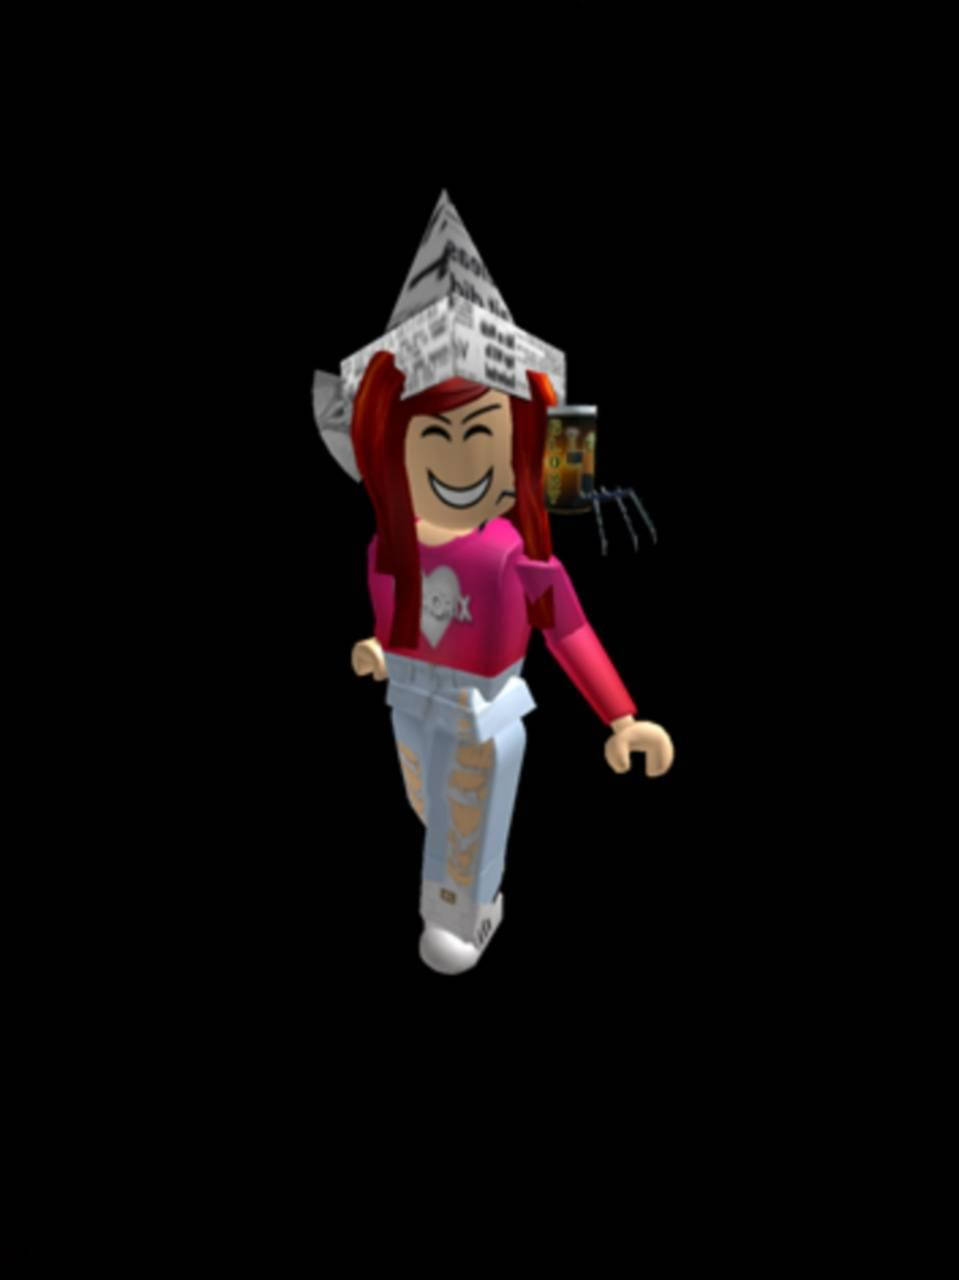 Cutest Roblox Outfit Ever!